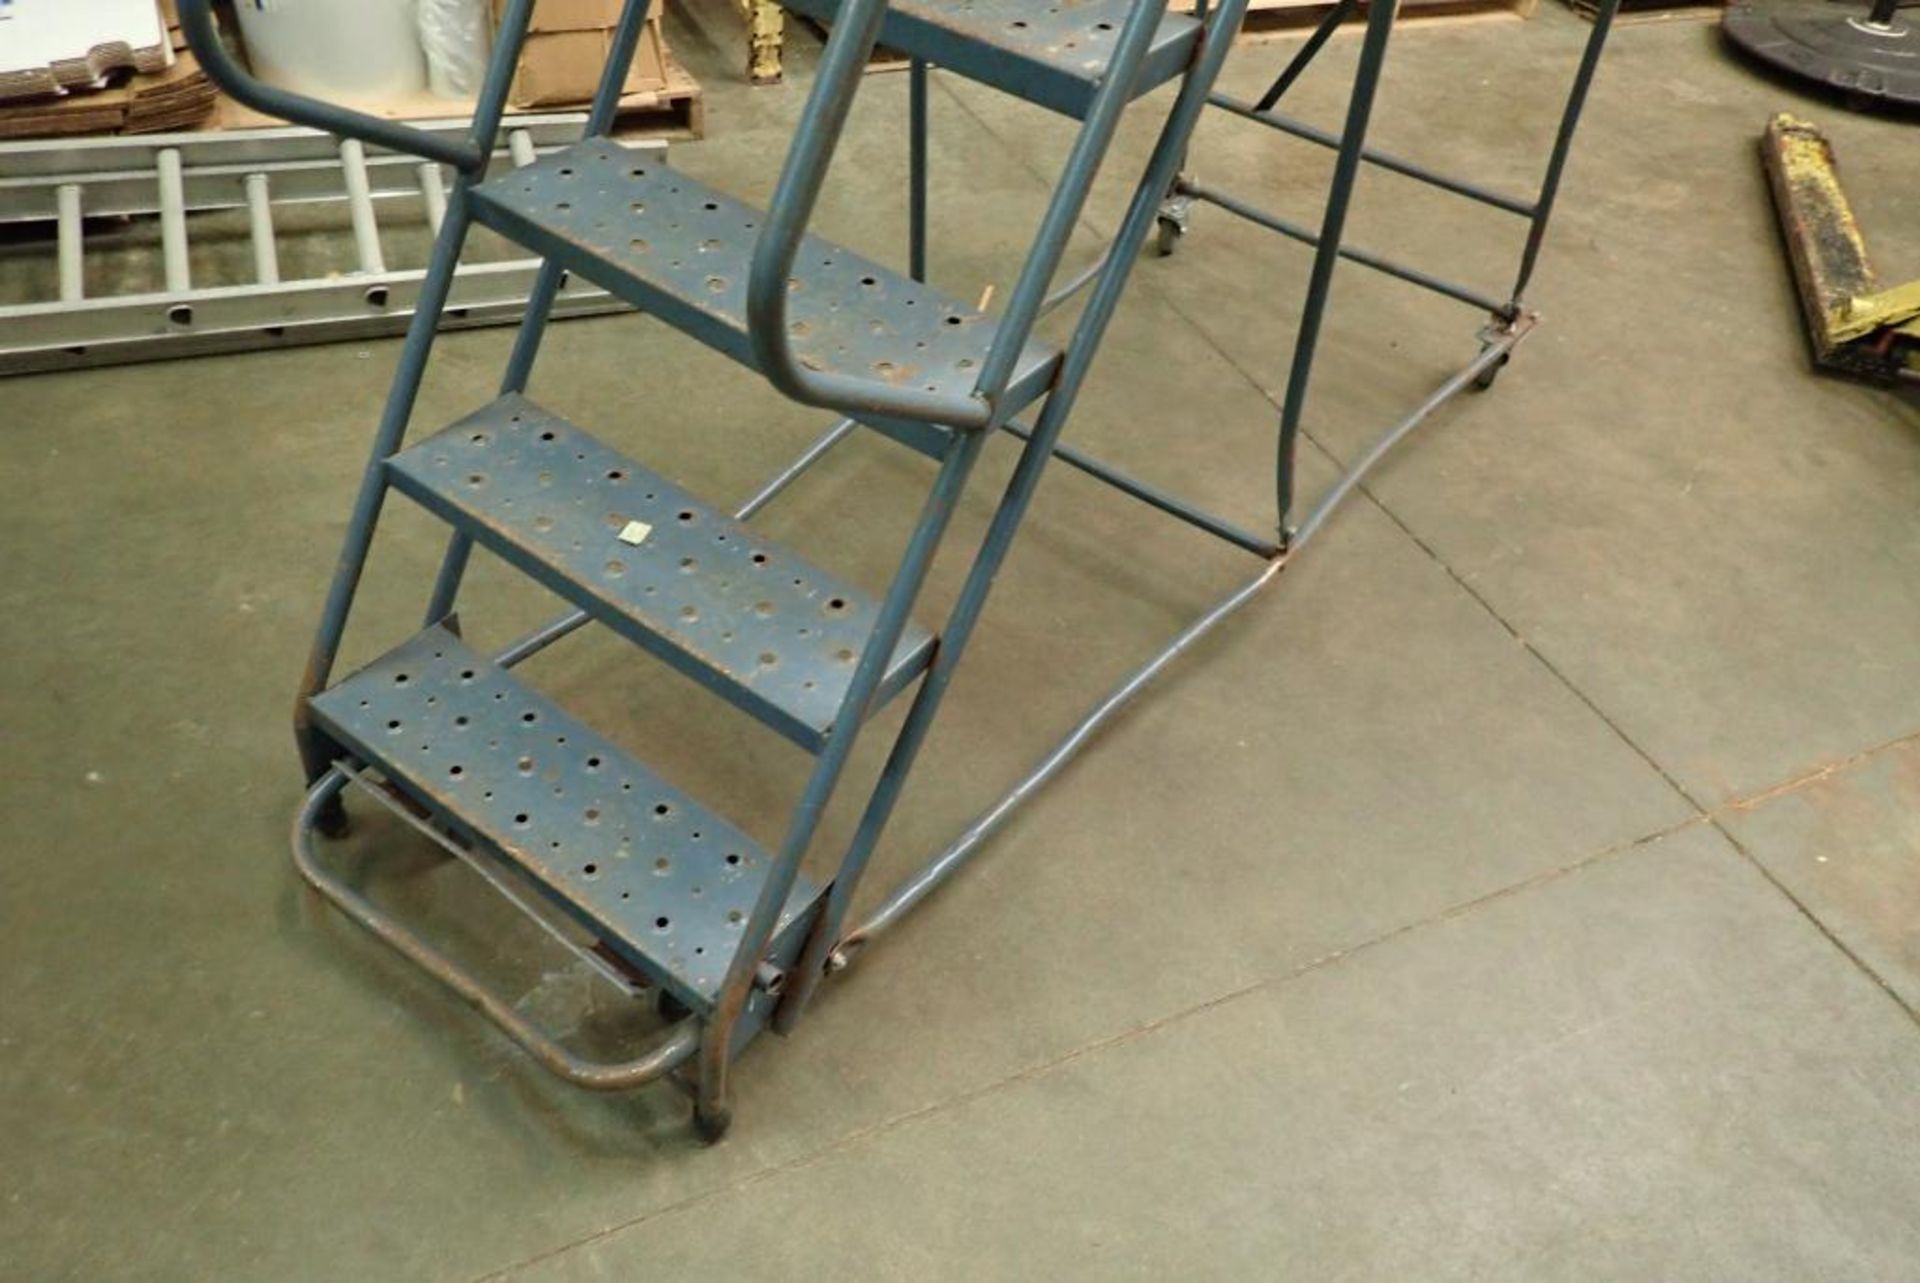 11-step rolling warehouse ladder - Image 4 of 6